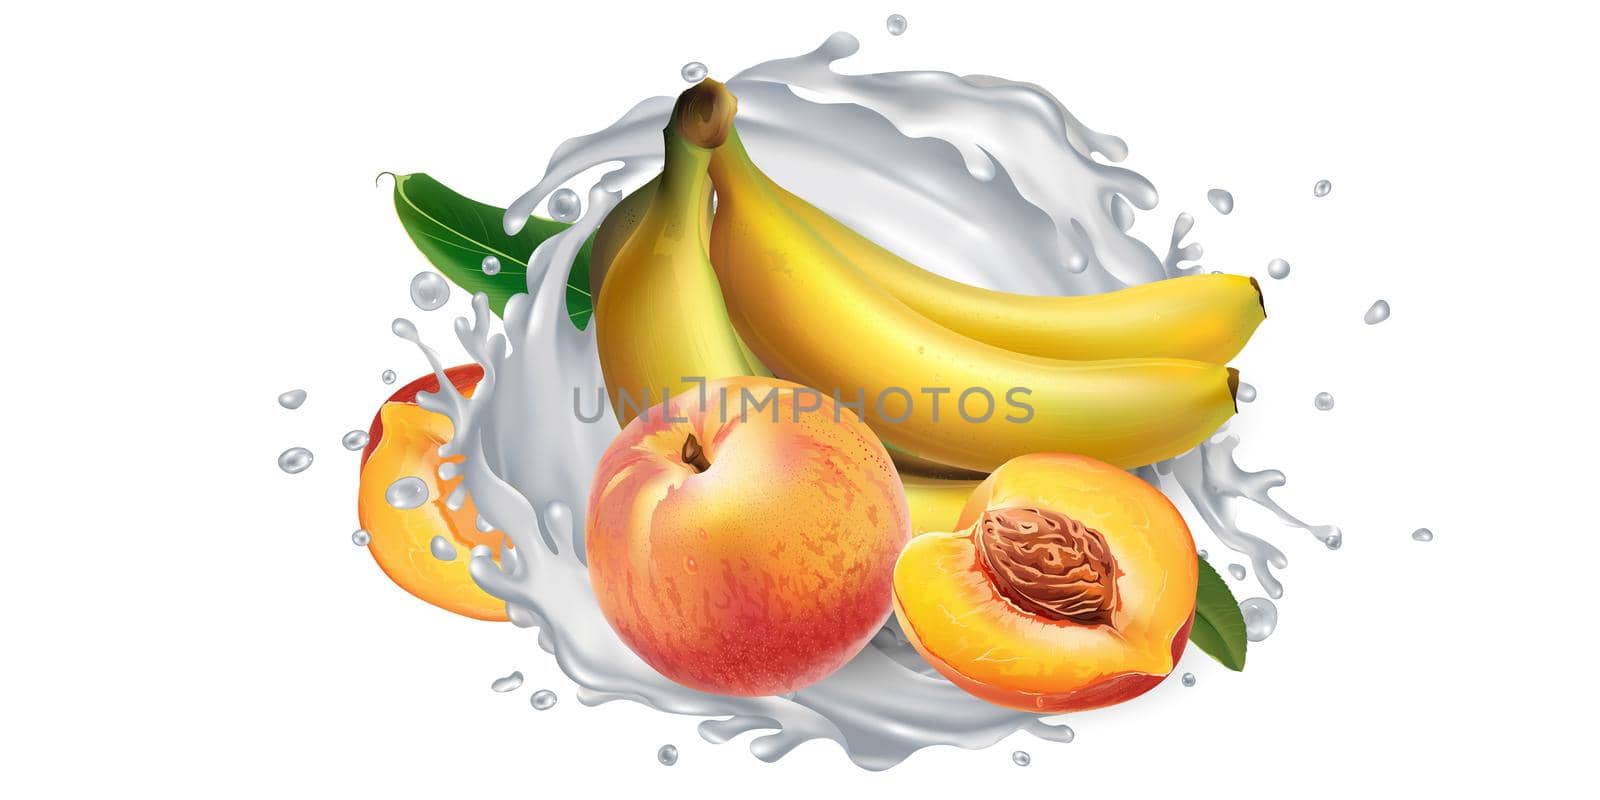 Bananas and peaches in a splash of milk or yogurt on a white background. Realistic style illustration.